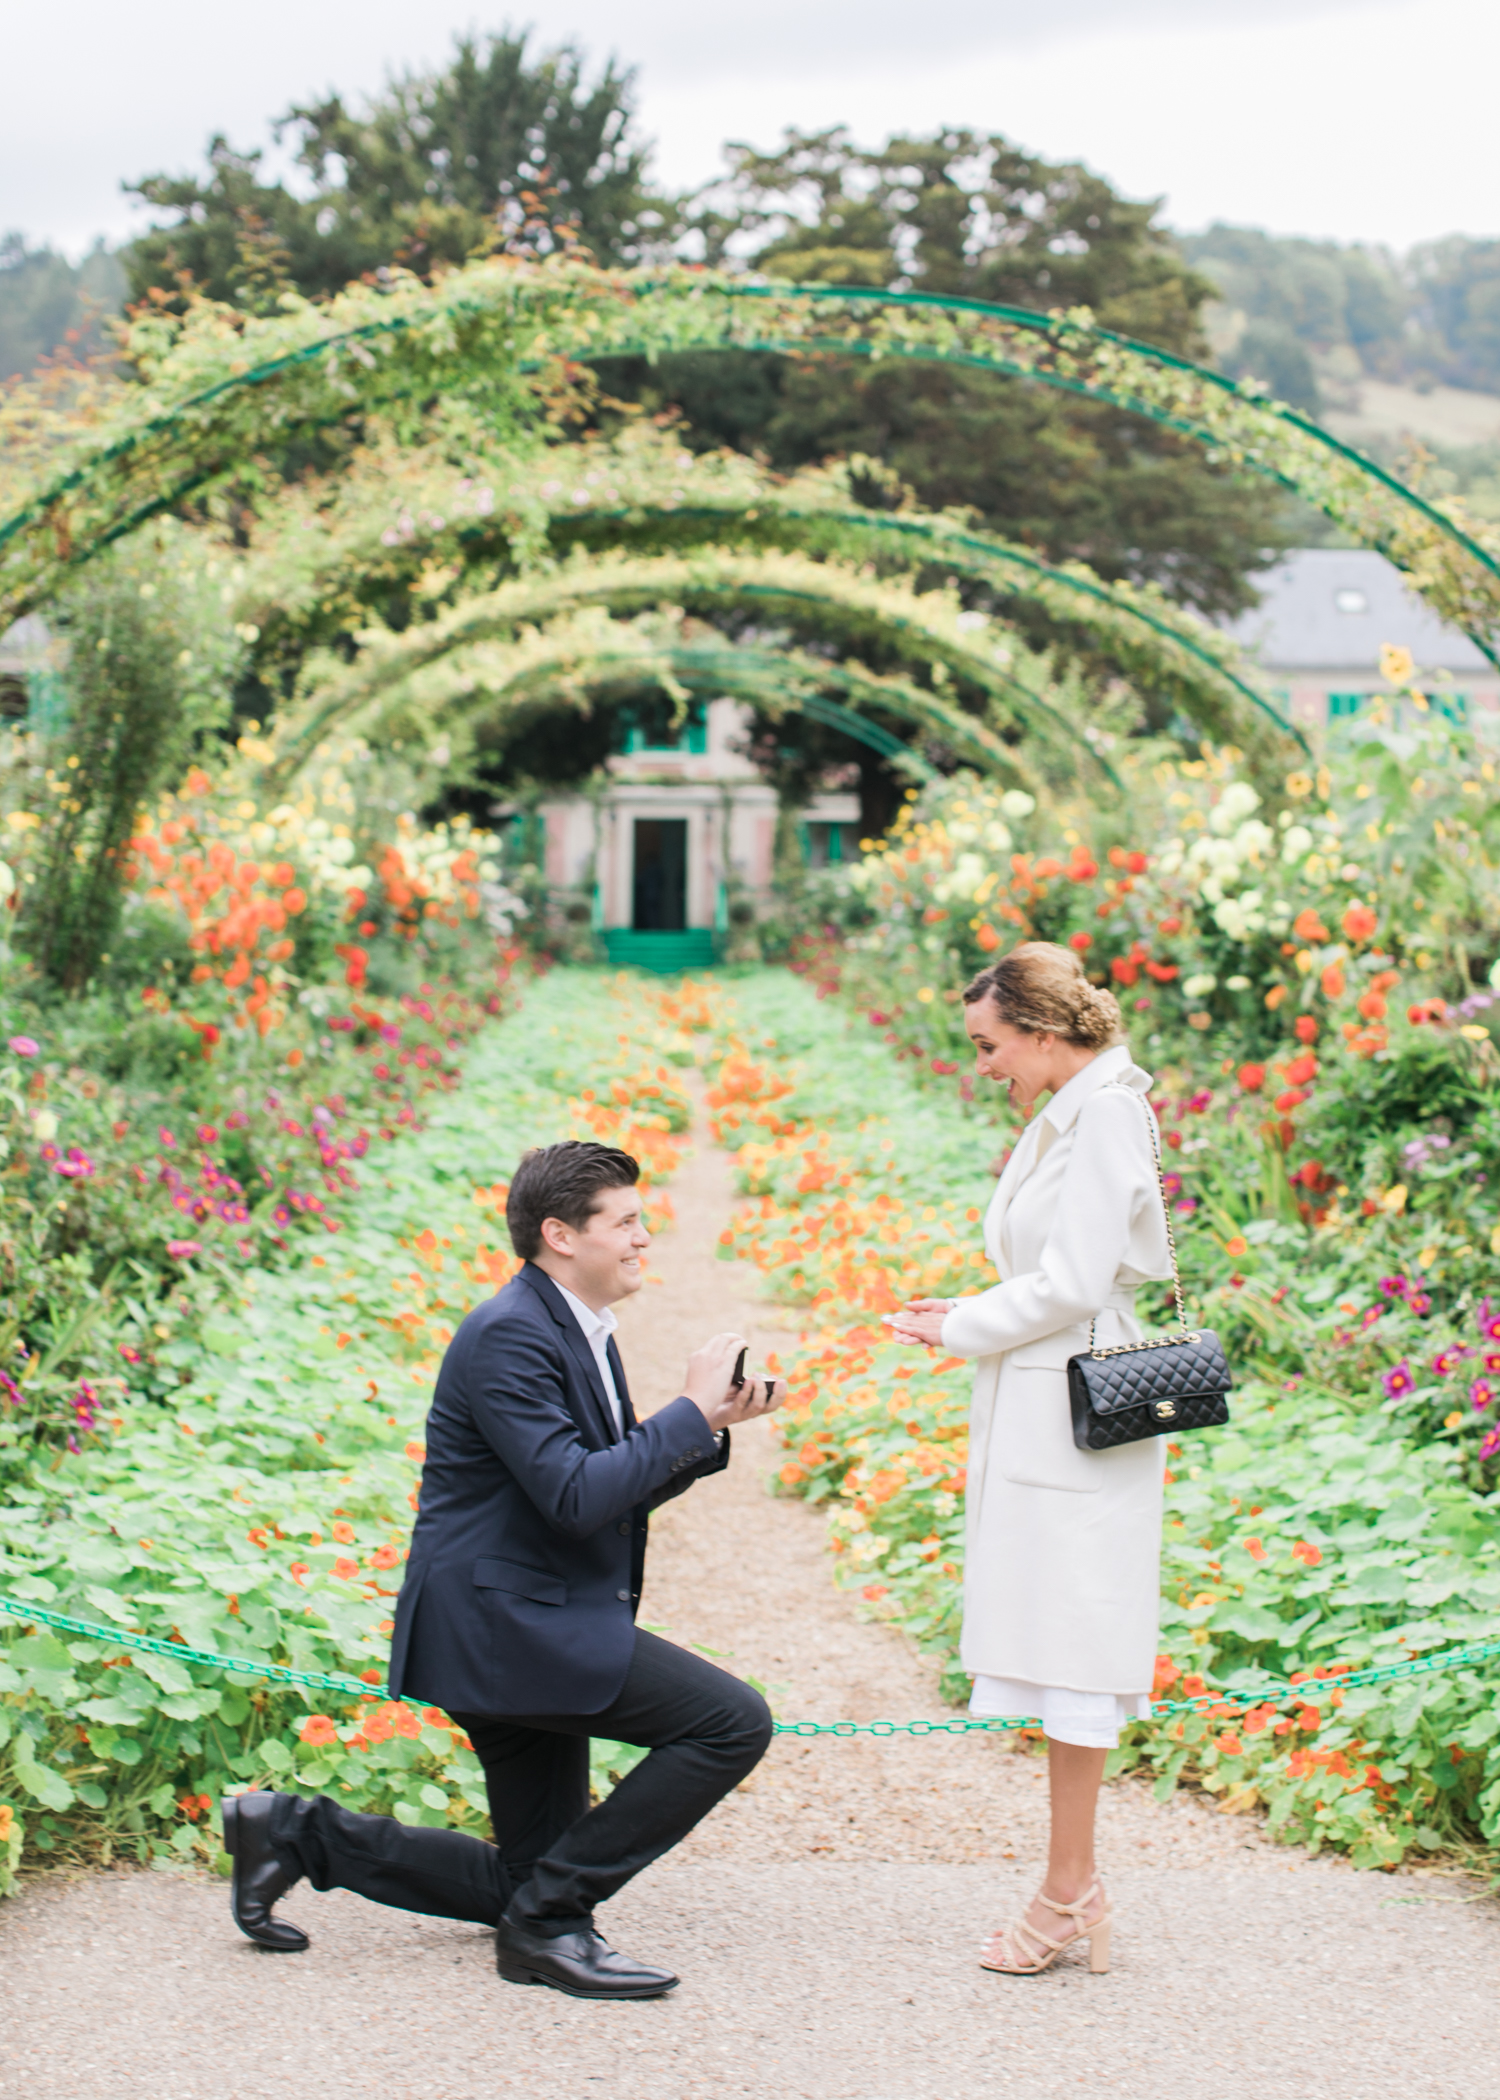 best Paris proposal location | Giverny, France proposal | Paris surprise proposal photographer